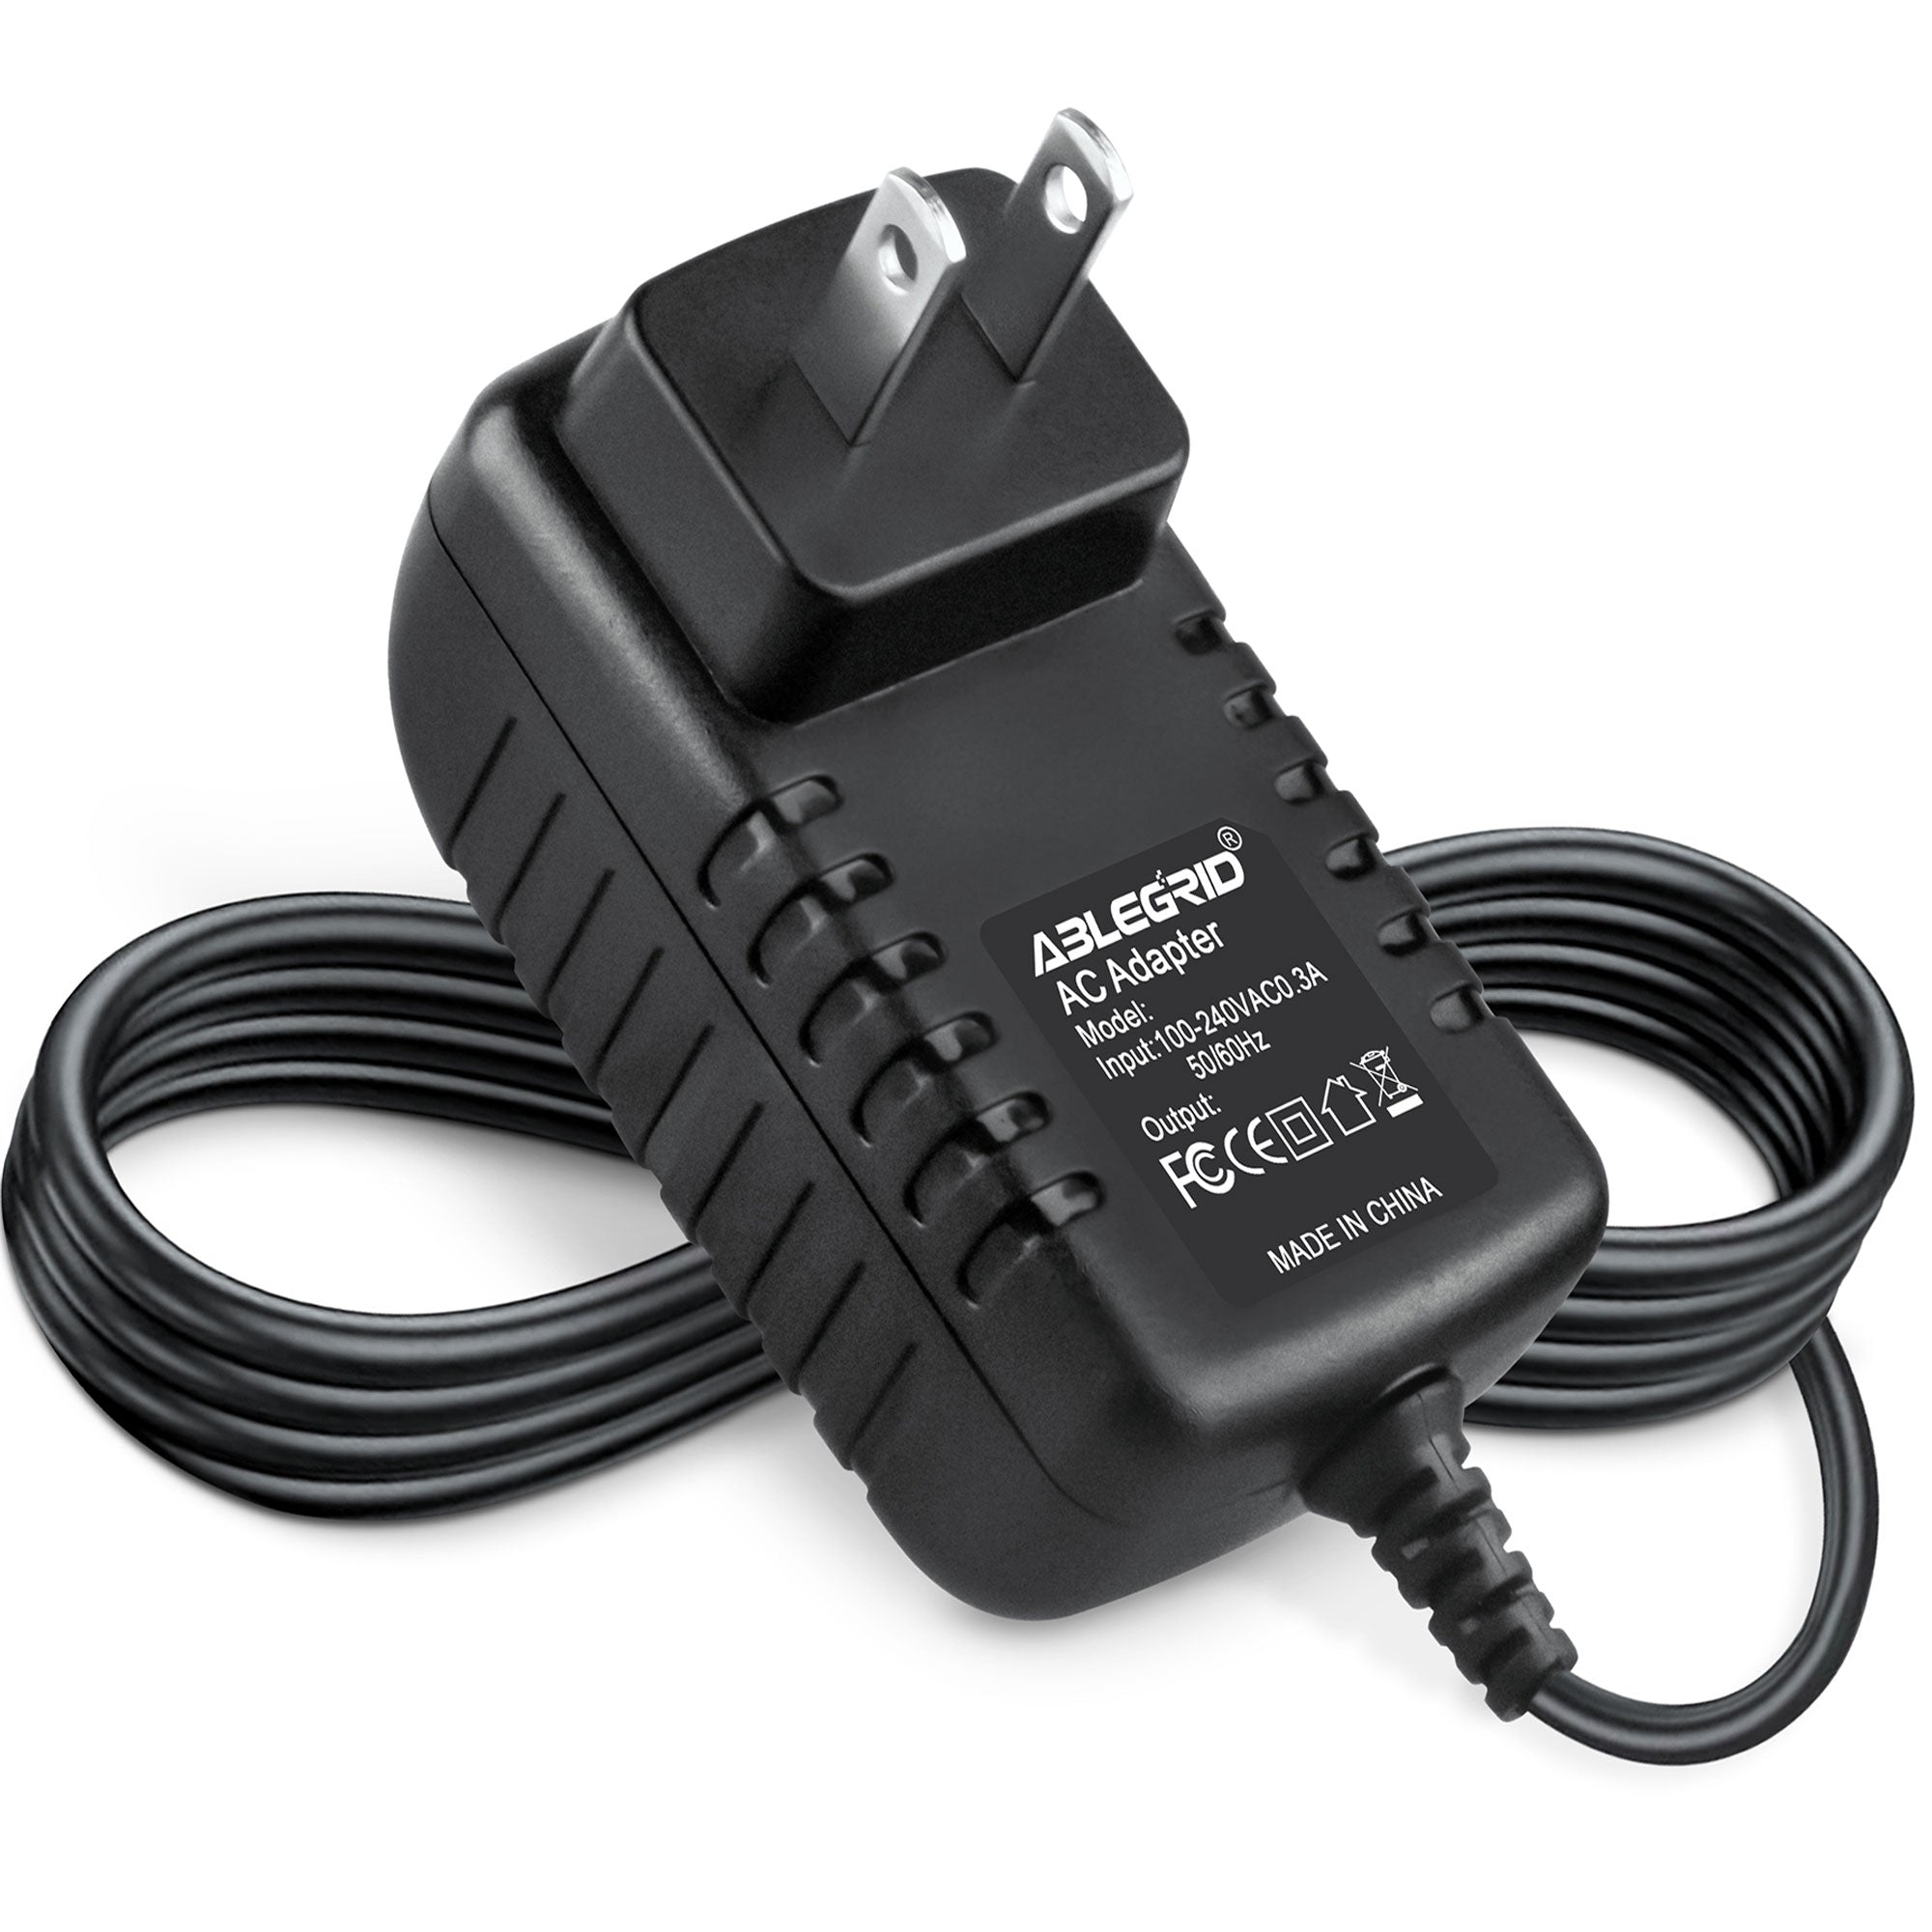 AbleGrid AC-DC Adapter for HON-KWANG HK-N112-U120 HKN112U120 I.T.E. Power Supply Cord Cable PS Wall Home Charger Input: 100 - 240 VAC 50/60Hz Worldwide Voltage Use Mains PSU